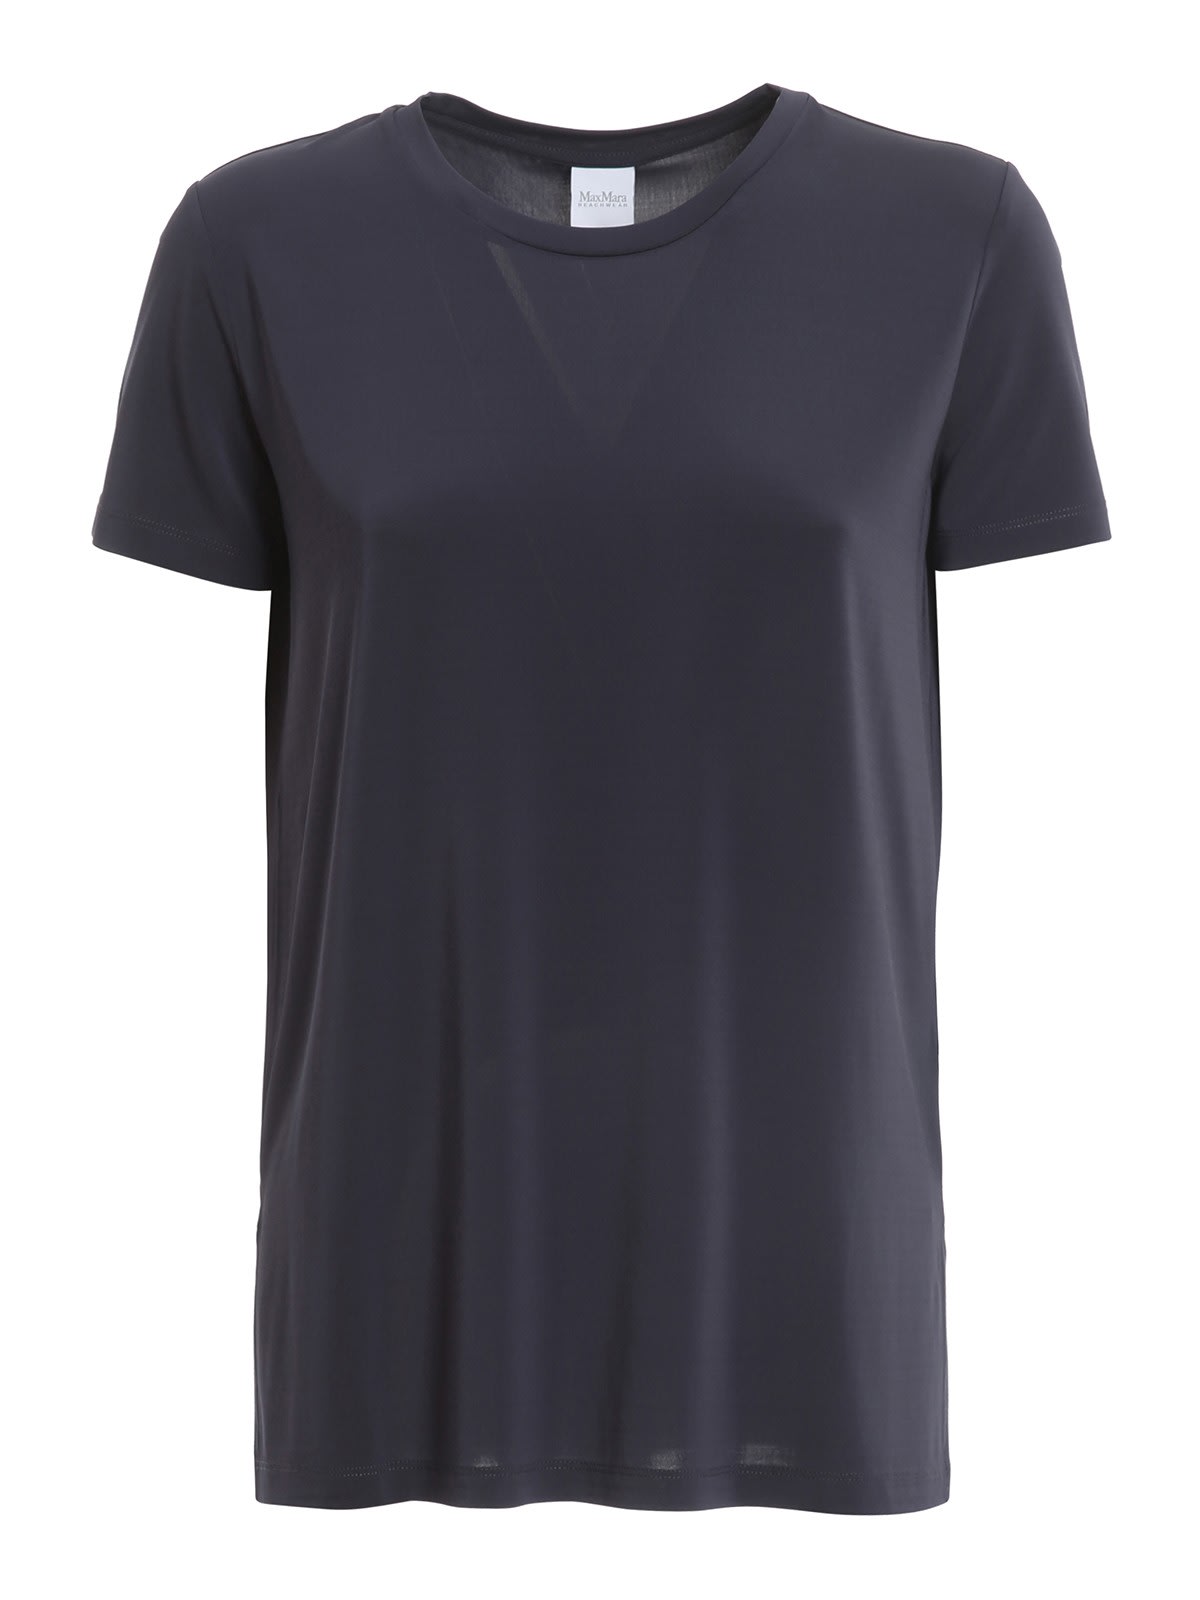 Women's MAX MARA T-Shirts On Sale, Up To 70% Off | ModeSens